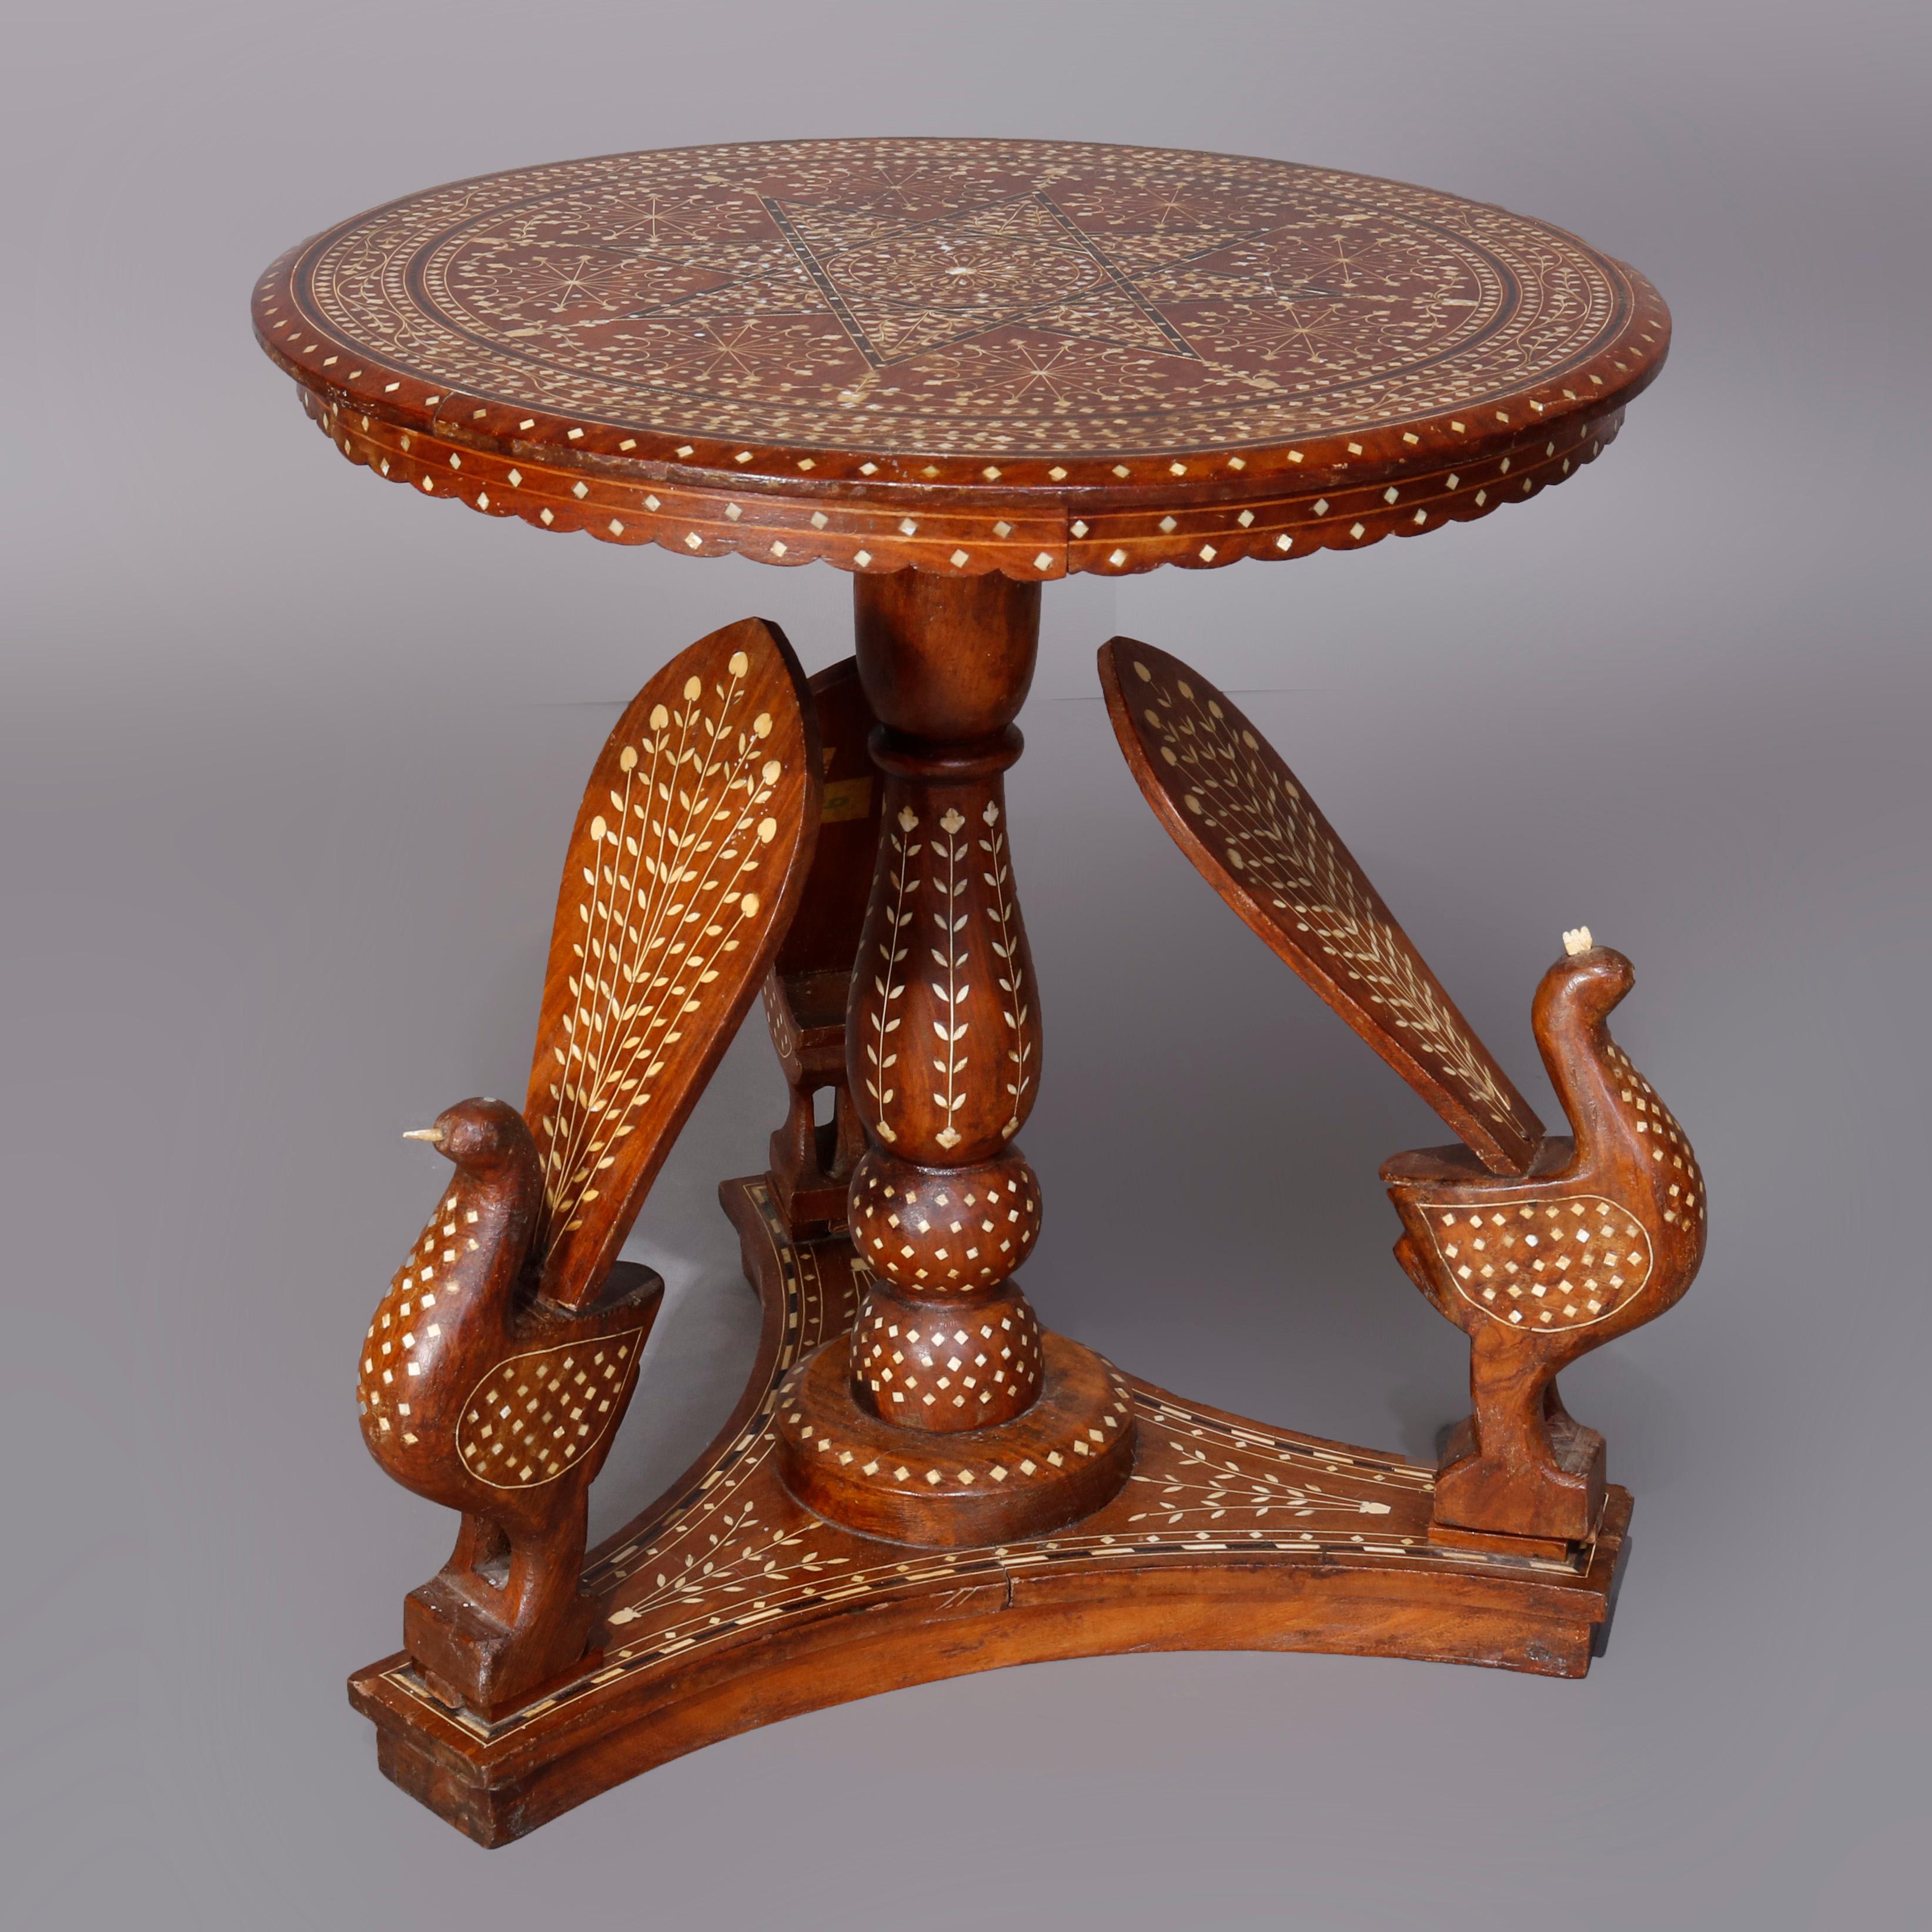 20th Century Indian Marquetry Carved and Inlaid Figural Peacock Side Table, circa 1910